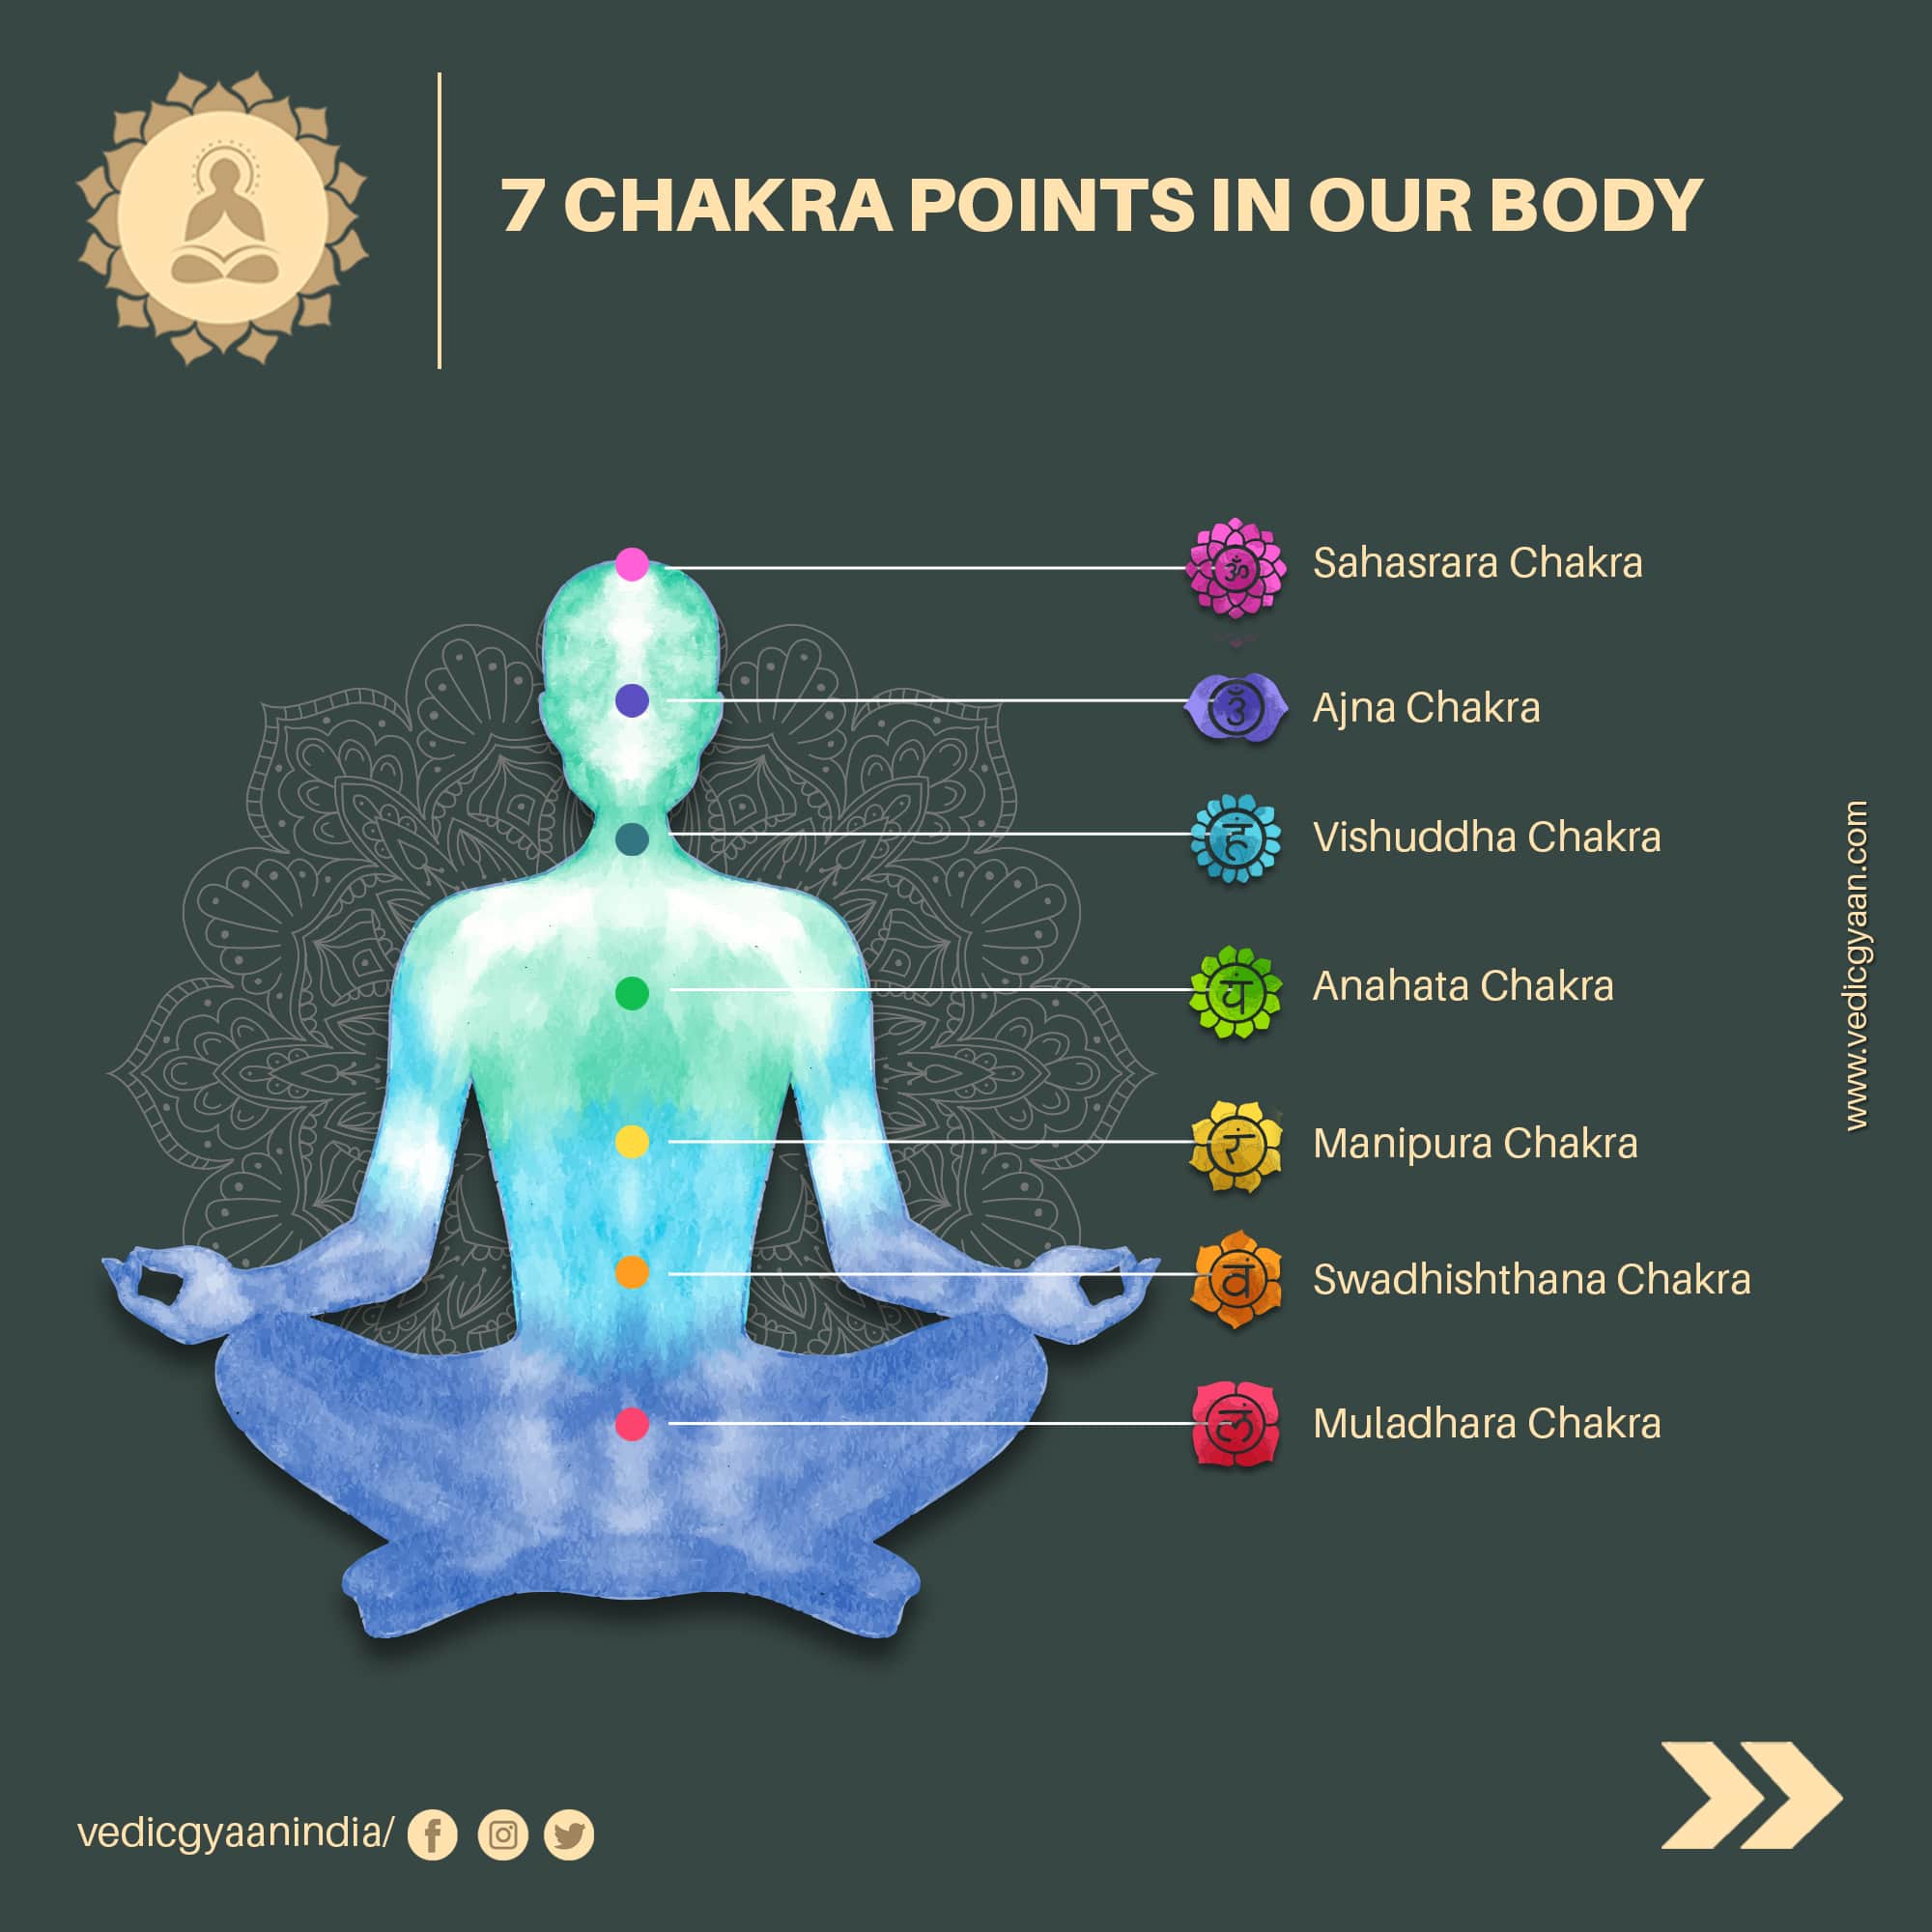 Fascinar Comprimido Chorrito Vedic Gyaan on Twitter: "You must have read some books or have heard from  many yogis about Chakras. But, do you know what chakras are? How do they  work? In the Sanskrit